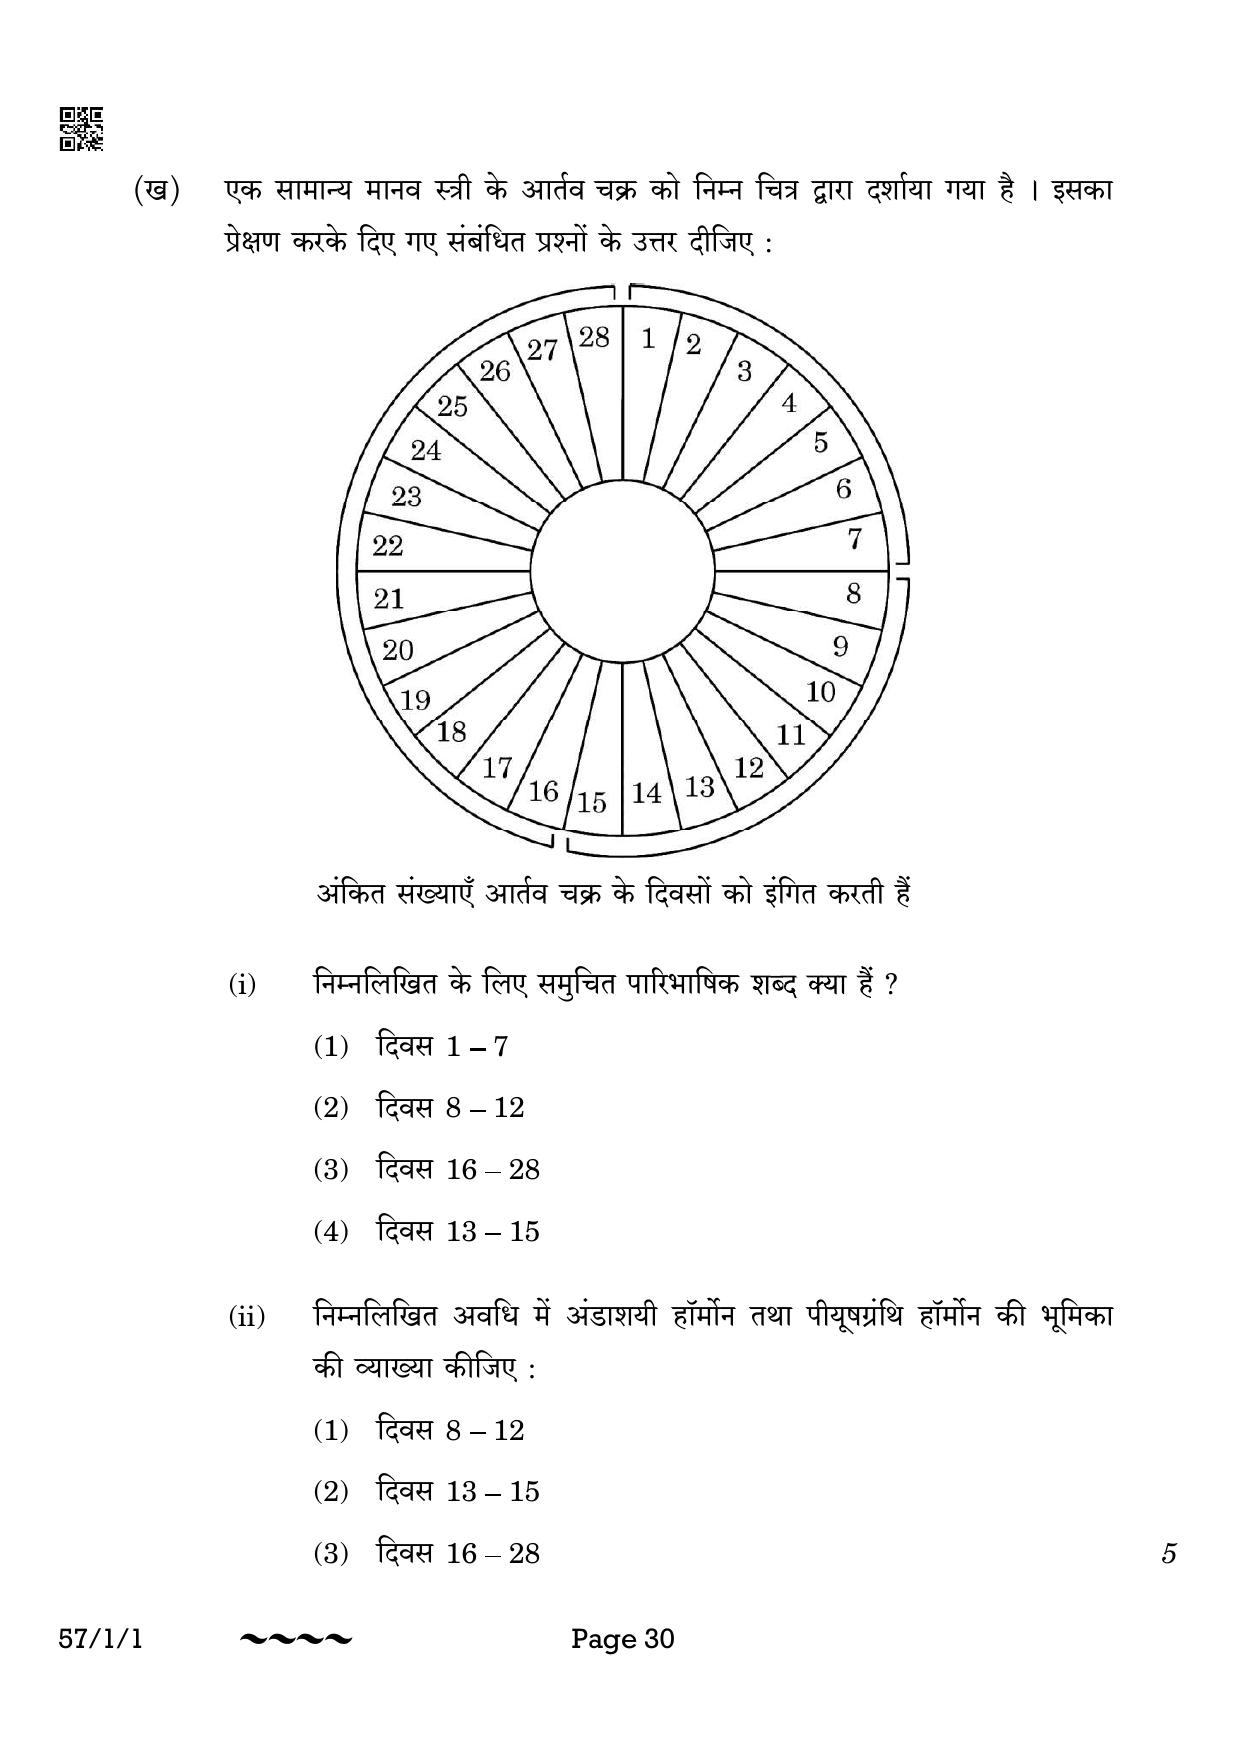 CBSE Class 12 57-1-1 Biology 2023 Question Paper - Page 30